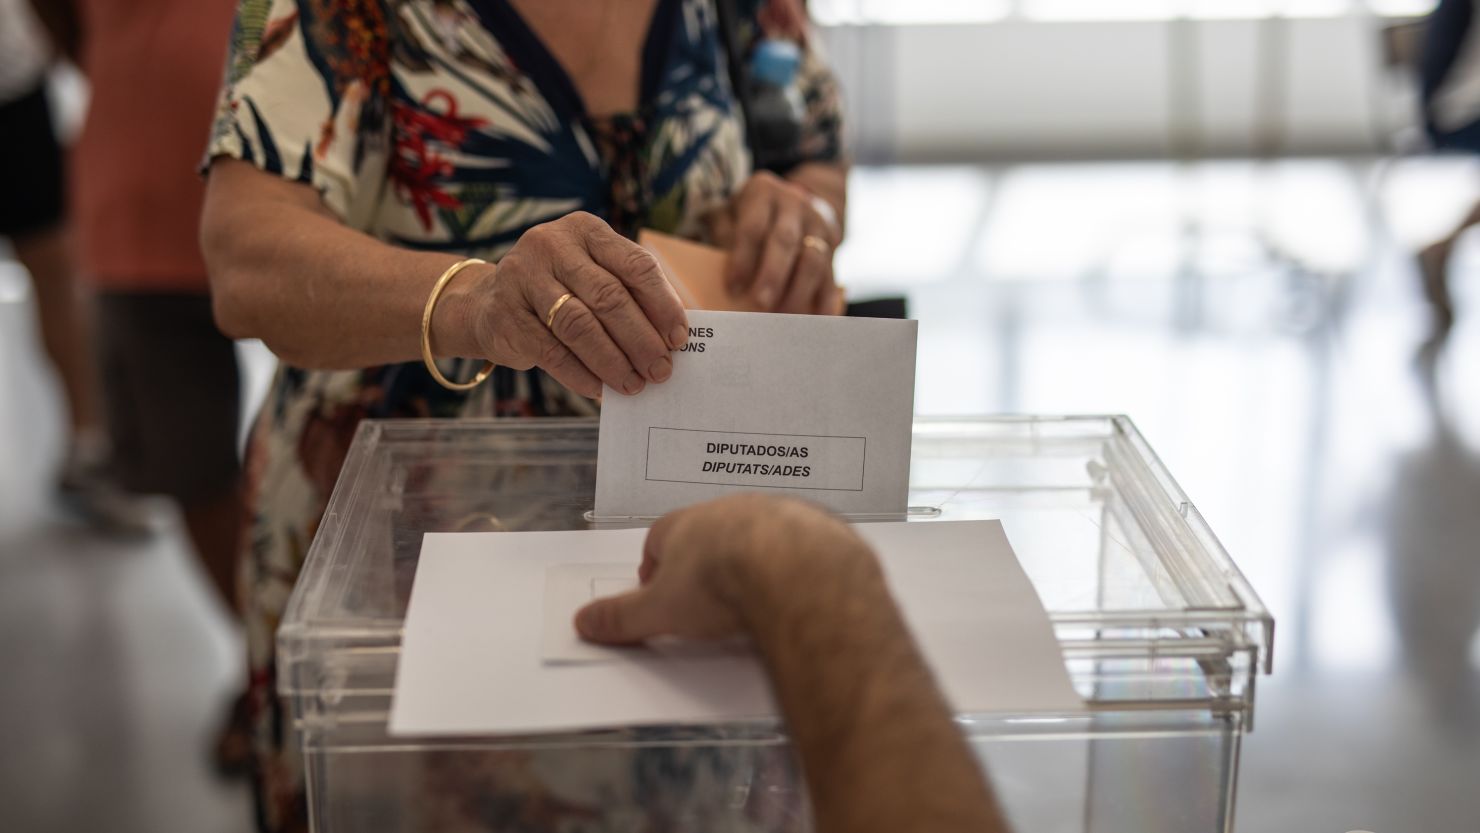 A woman places her vote in the ballot box at Leonor Canalejas Public School on July 23, 2023 in Benidorm, Spain. Voters in Spain head to the polls on July 23 to cast their votes and elect Spain's next government. 